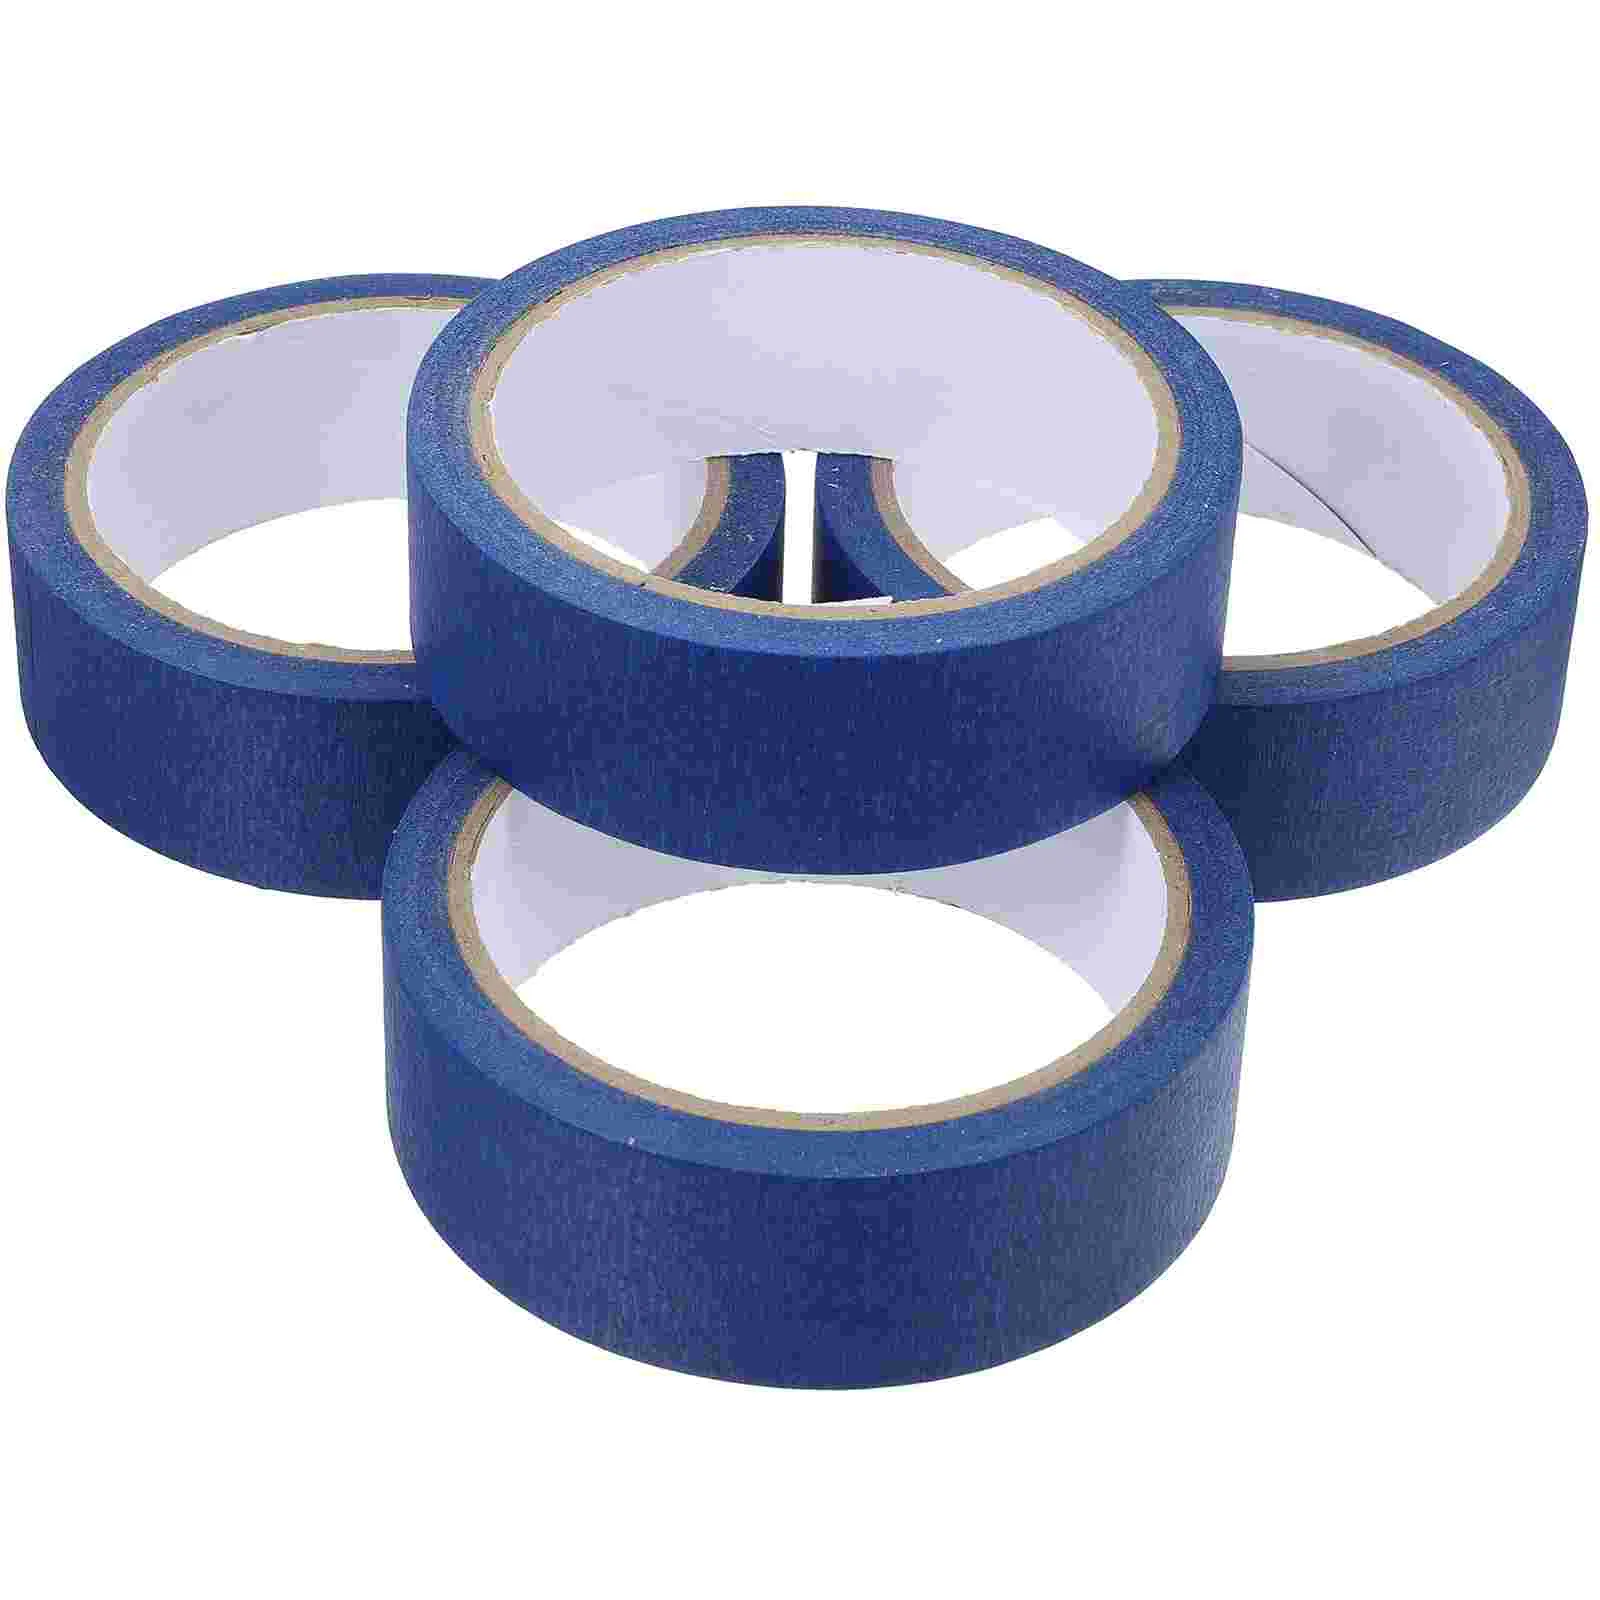 Blue Masking Tape DIY Tapes Crafts Adhesive Paint for Painting Painter Duct 1pcs grid washi tape japanese paper diy planner masking tape adhesive tapes stickers decorative stationery tapes 15mm 10m